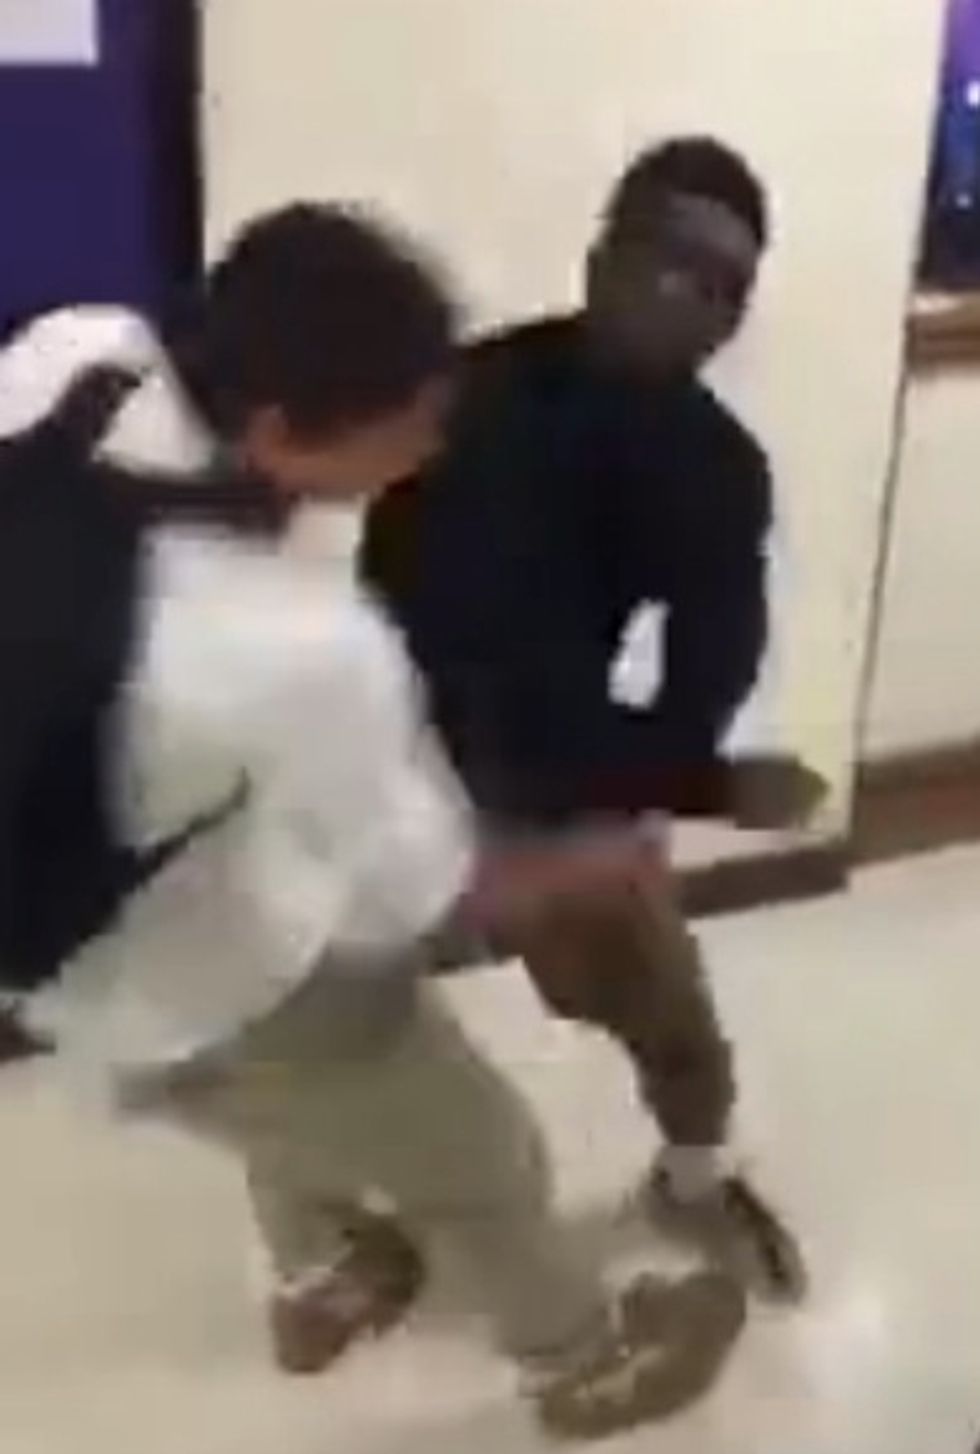 'Call 911!': Disturbing Video Shows Teen Delivering Brutal, Unexpected Right Hook to Fellow Student — and the Scary Seconds That Follow